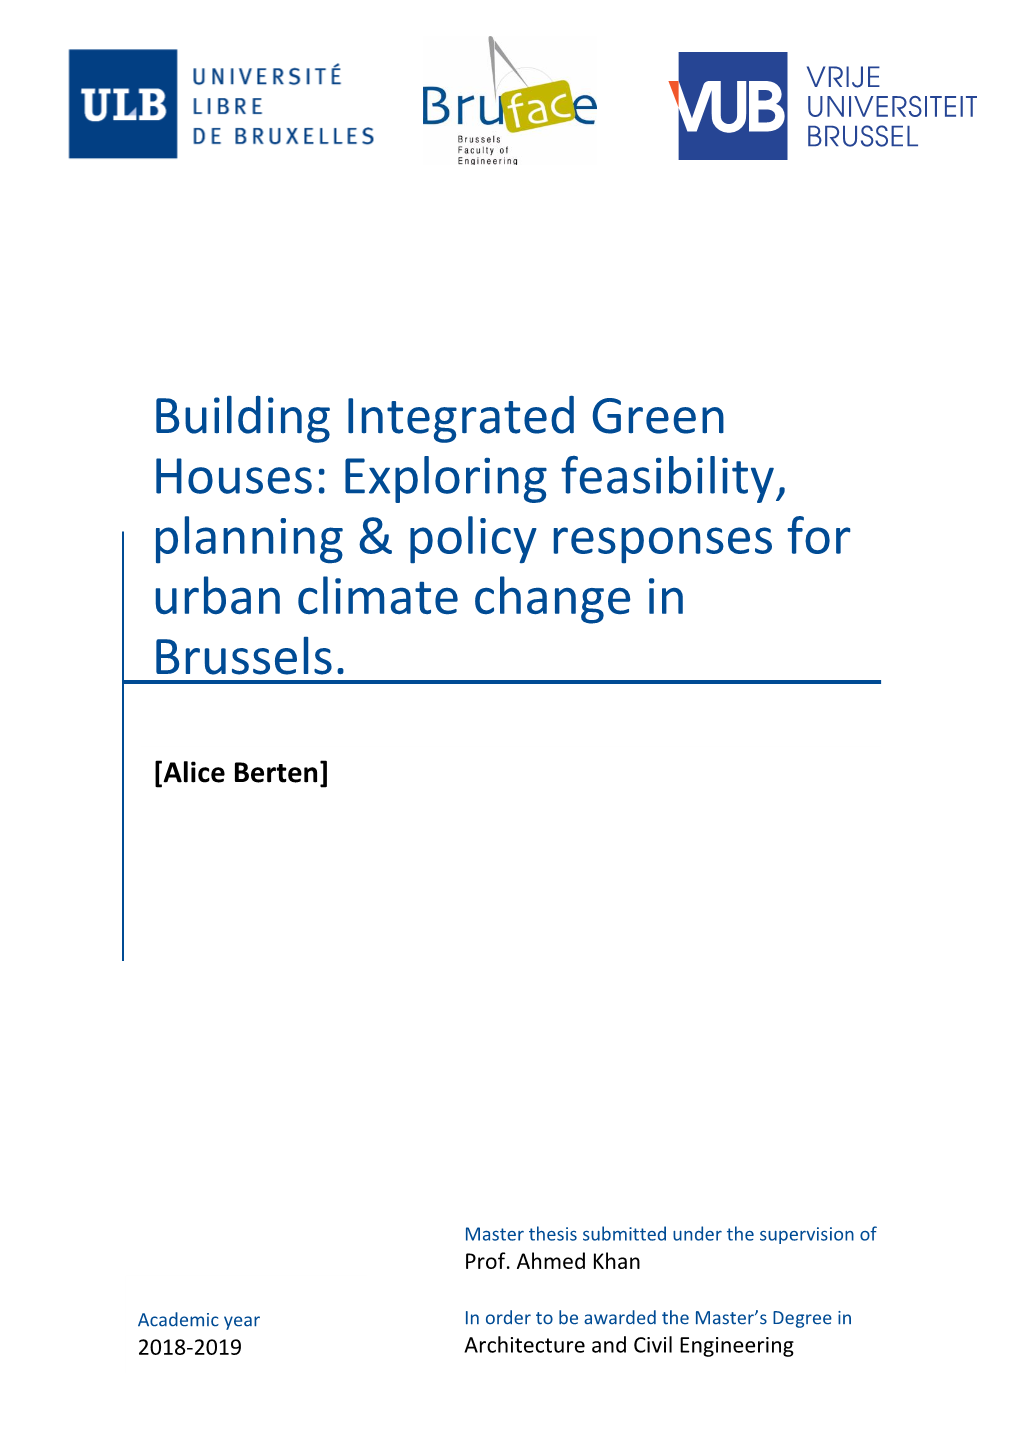 Building Integrated Green Houses: Exploring Feasibility, Planning & Policy Responses for Urban Climate Change in Brussels